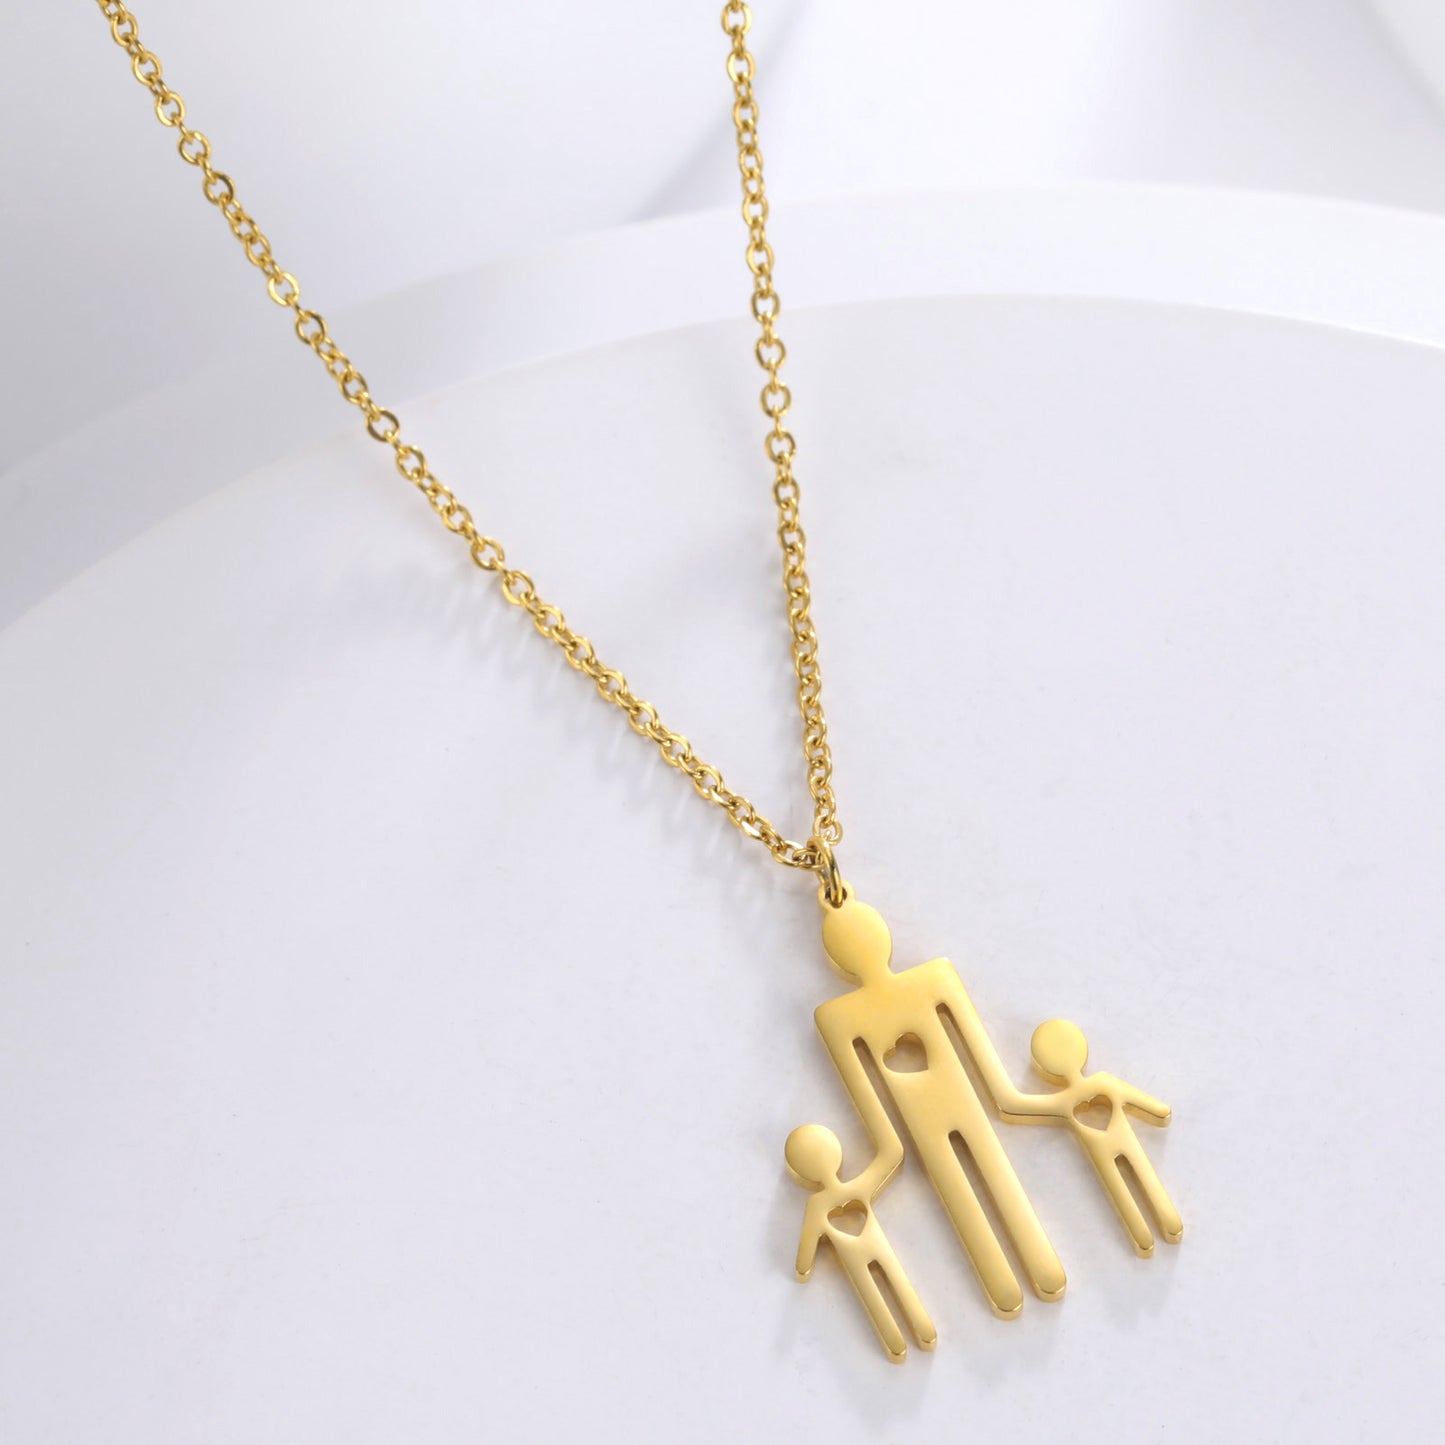 Family Series Titanium Steel Ornament Cut One Large Two Small 304 Material Stainless Steel Necklace